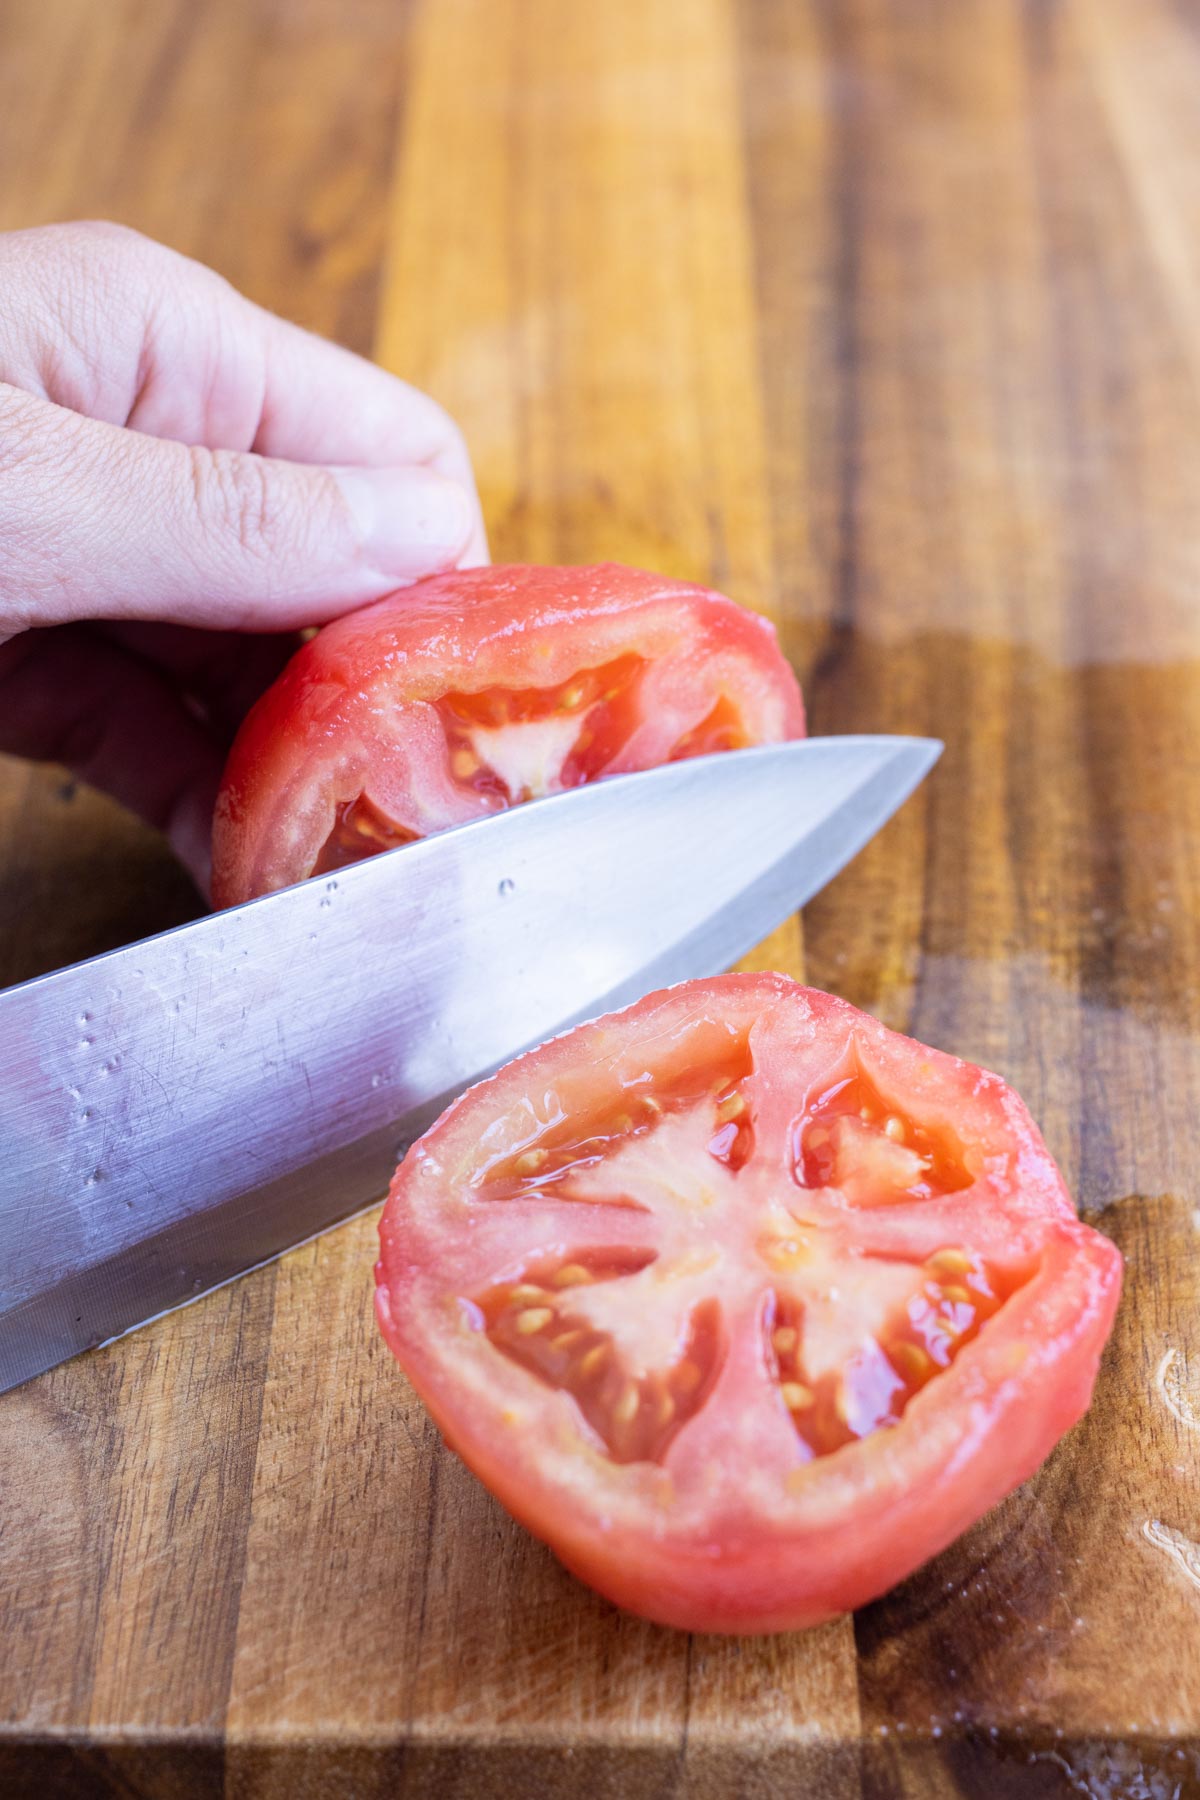 A sharp knife slices a peeled tomato in half to remove the seeds.